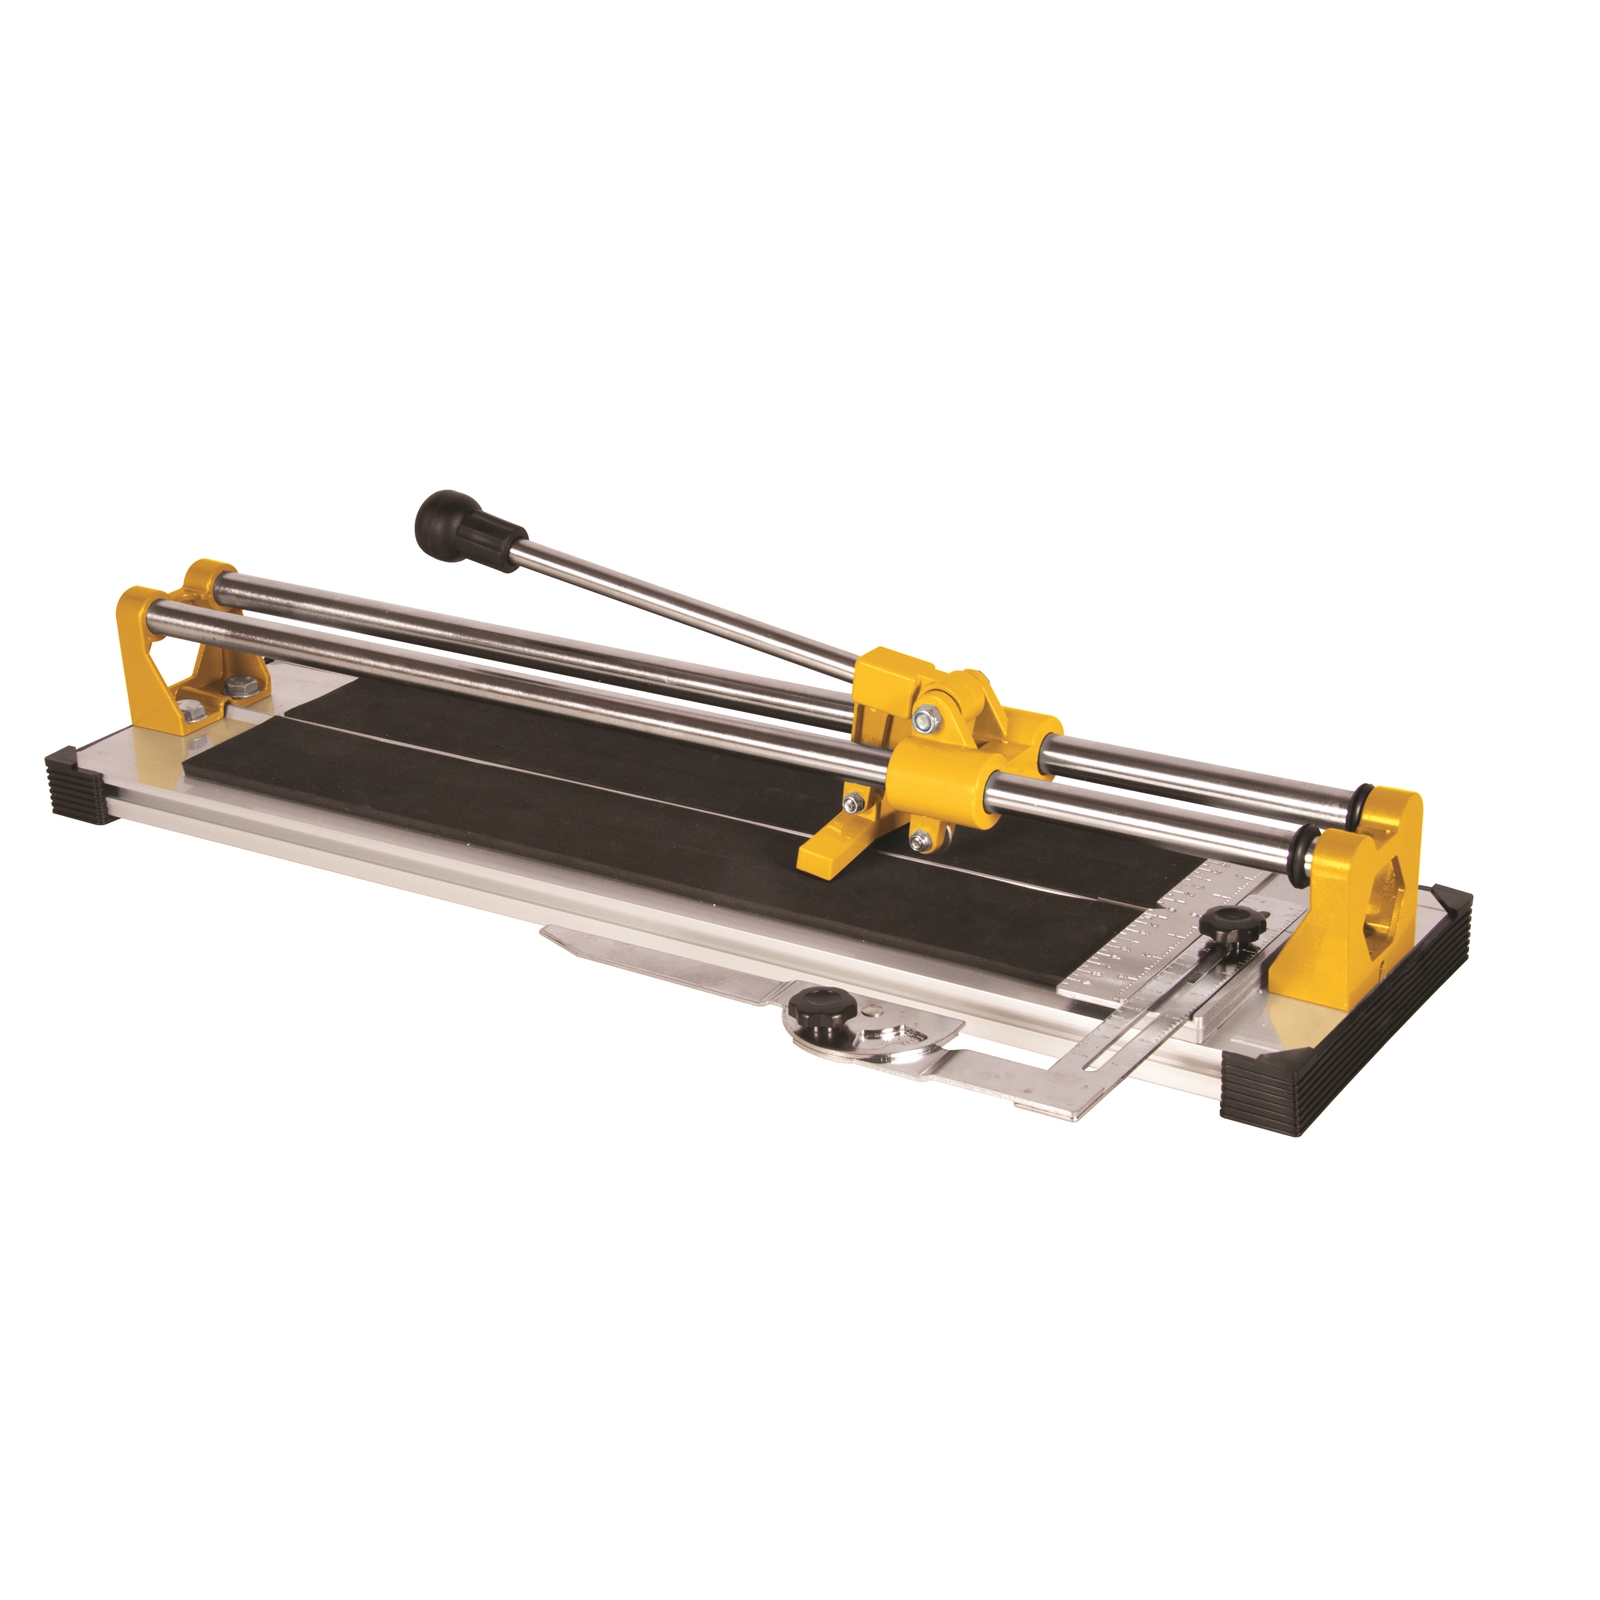 QEP 540mm Promaster Tile Cutter